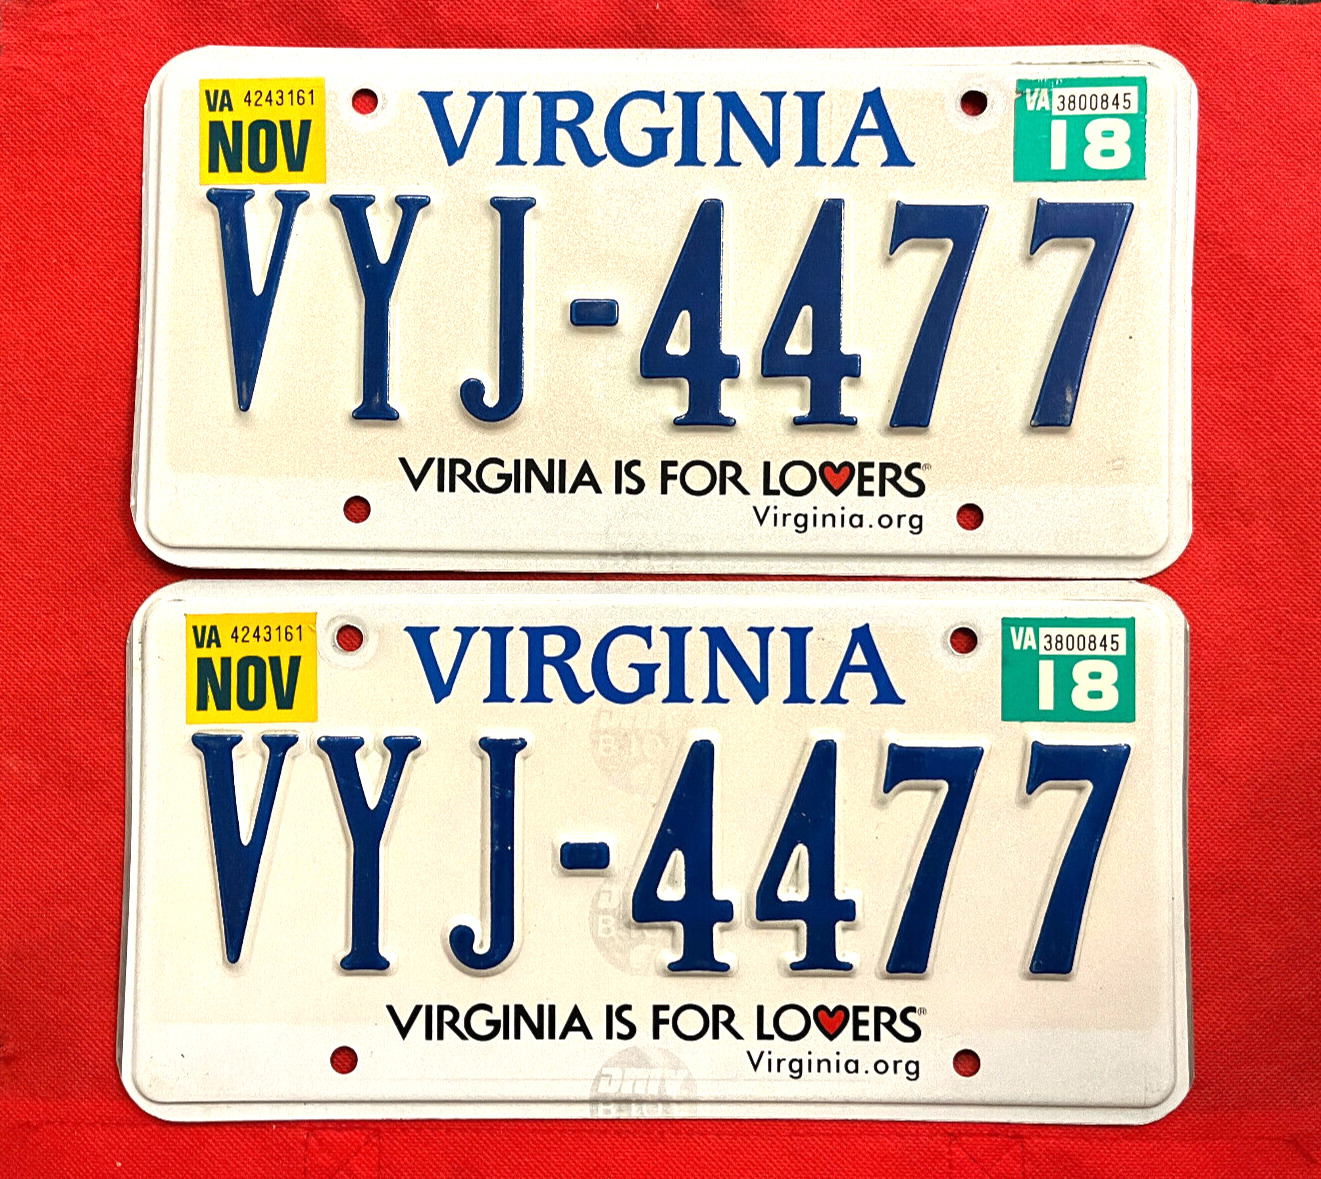 2018 Virginia License Plate Pair VYJ-4477 Expired / Crafts / Collect / Specialty